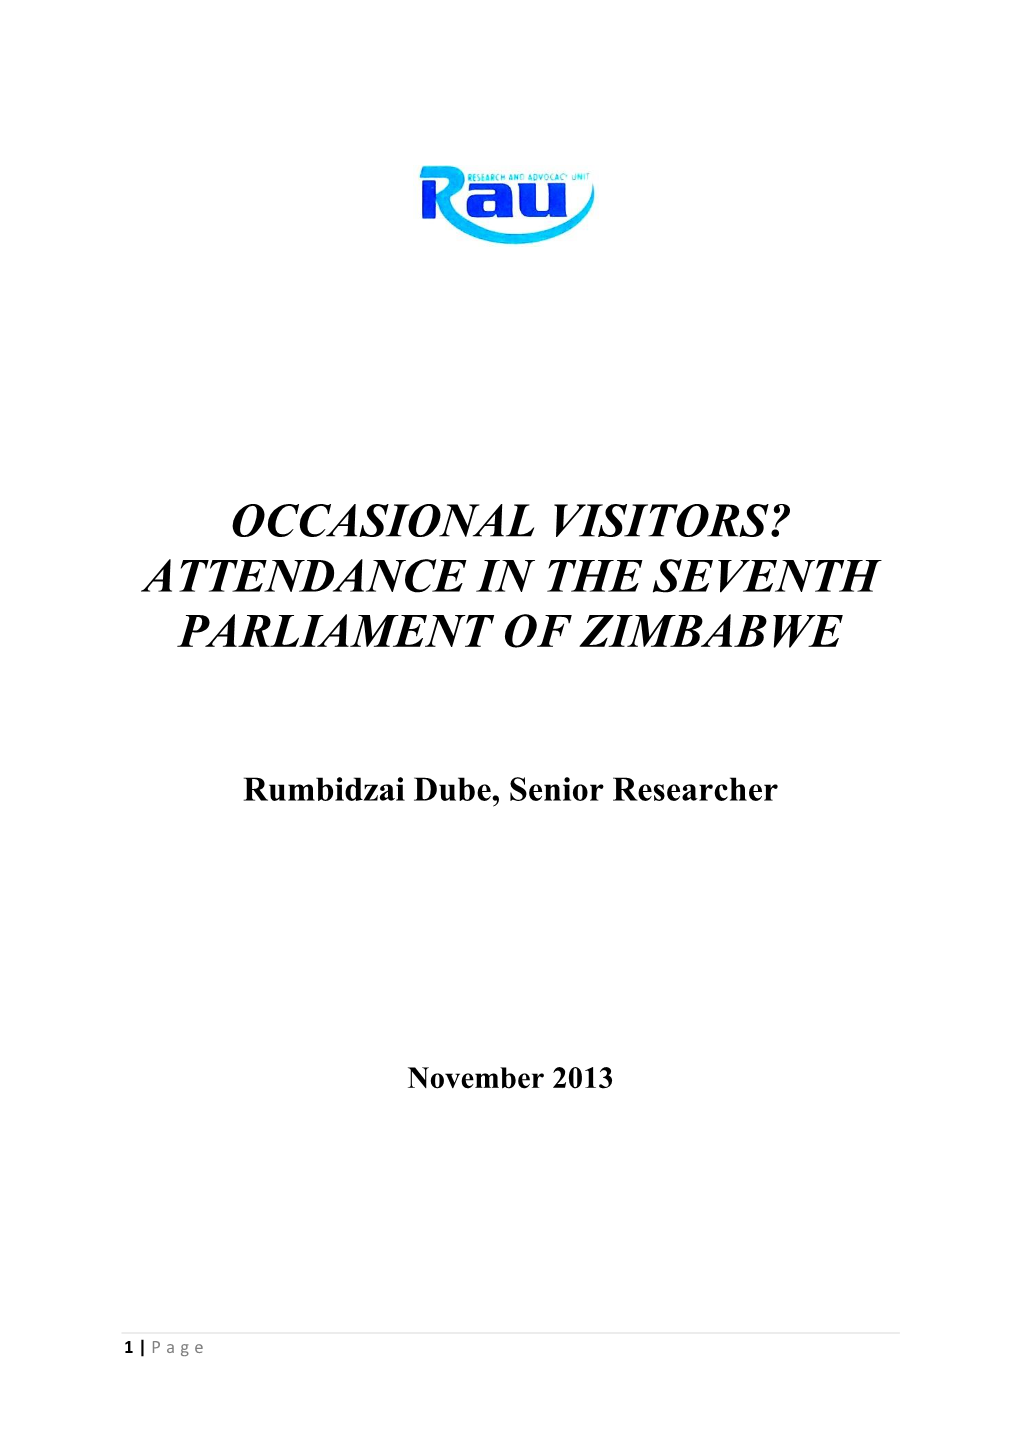 Attendance in the Seventh Parliament of Zimbabwe